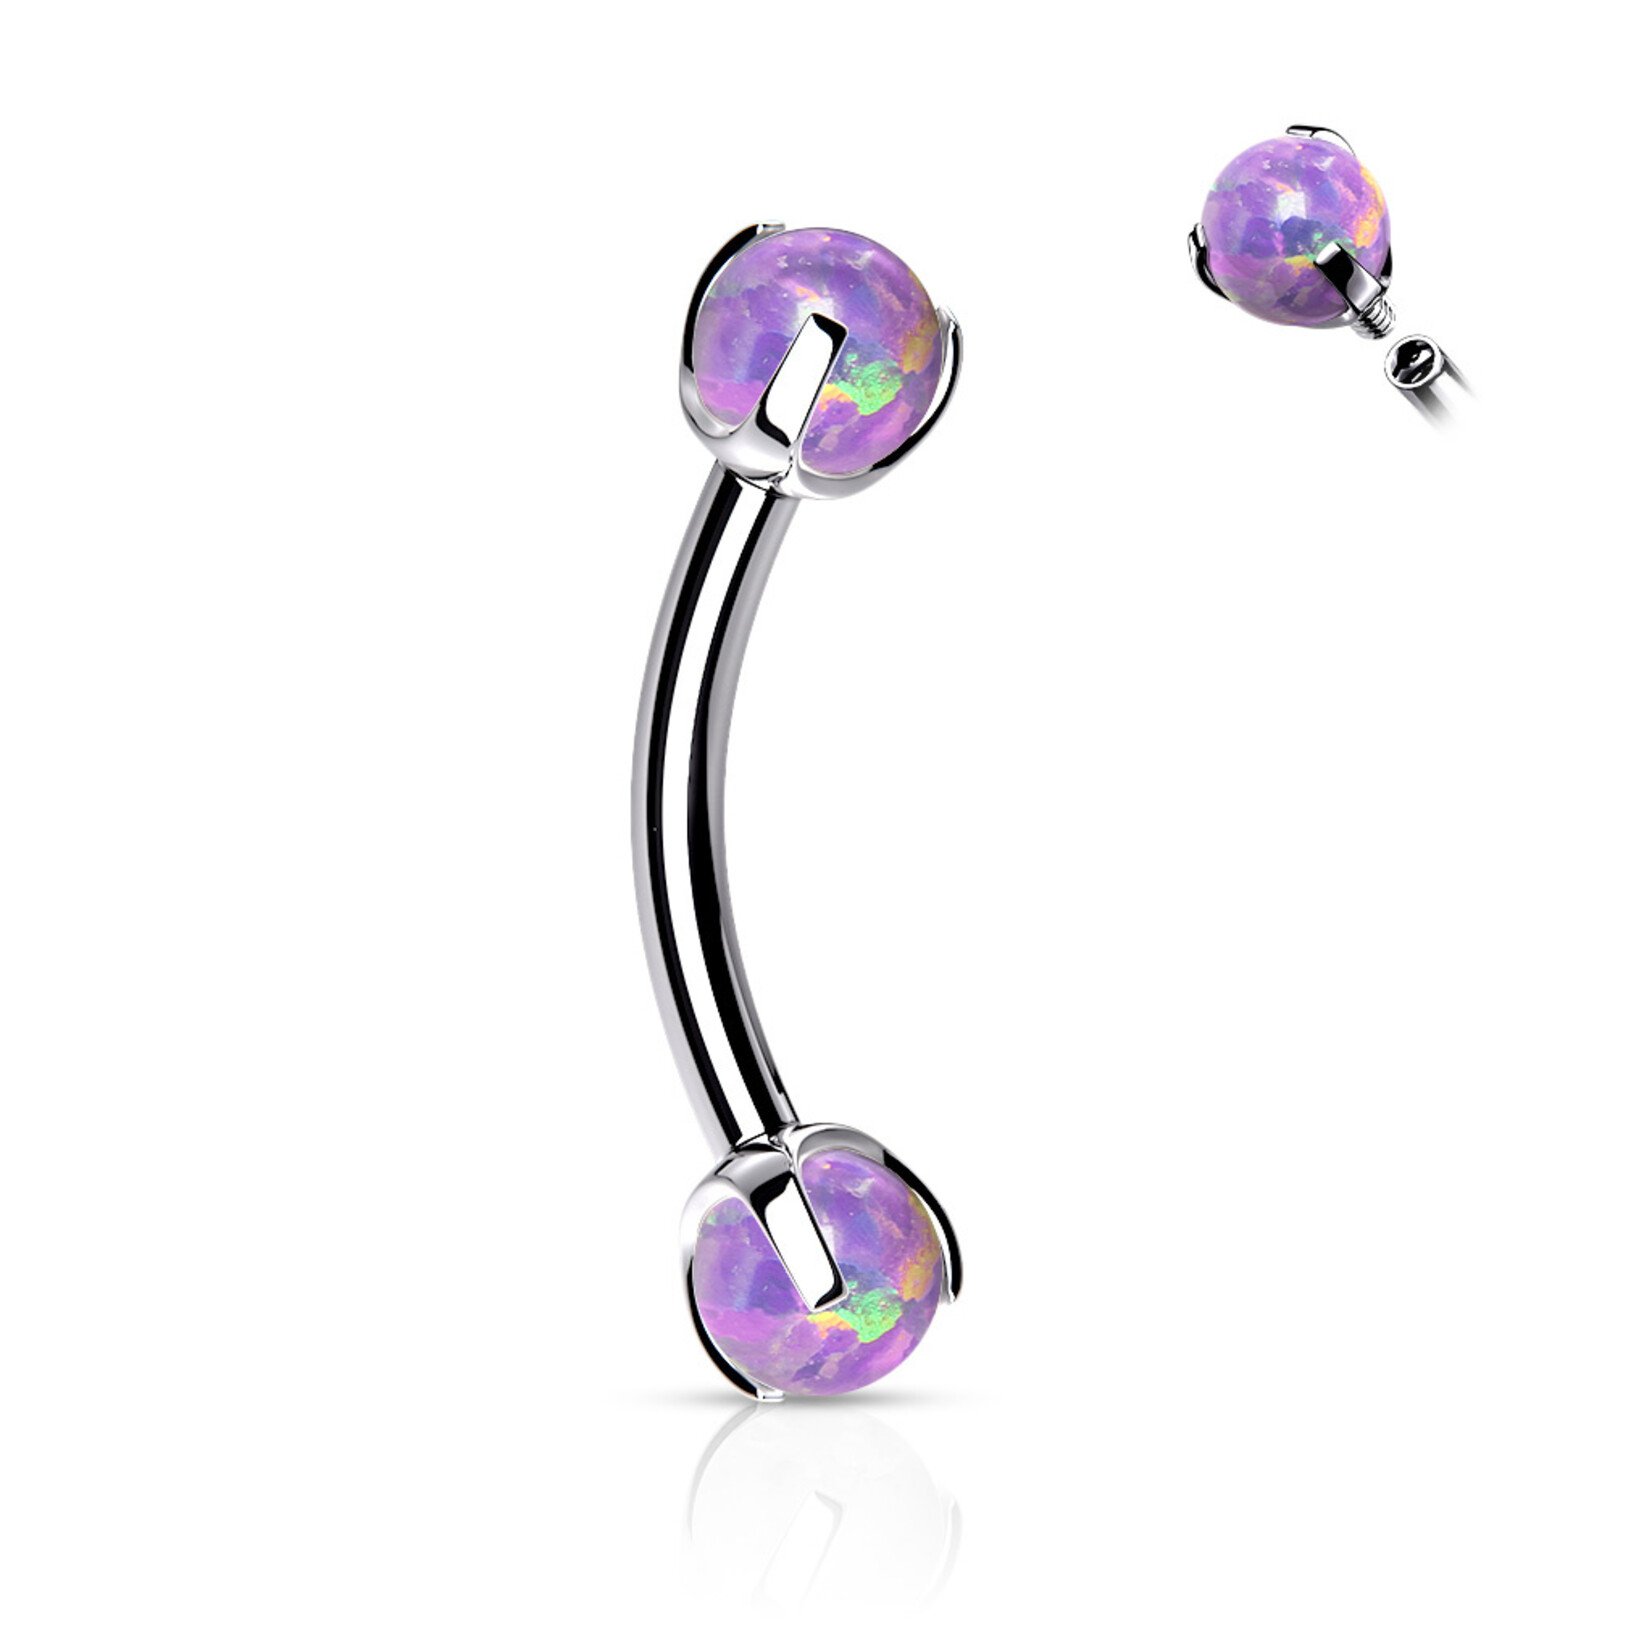 Hollywood Body Jewelry Claw Opal Eyebrow Bent Barbell